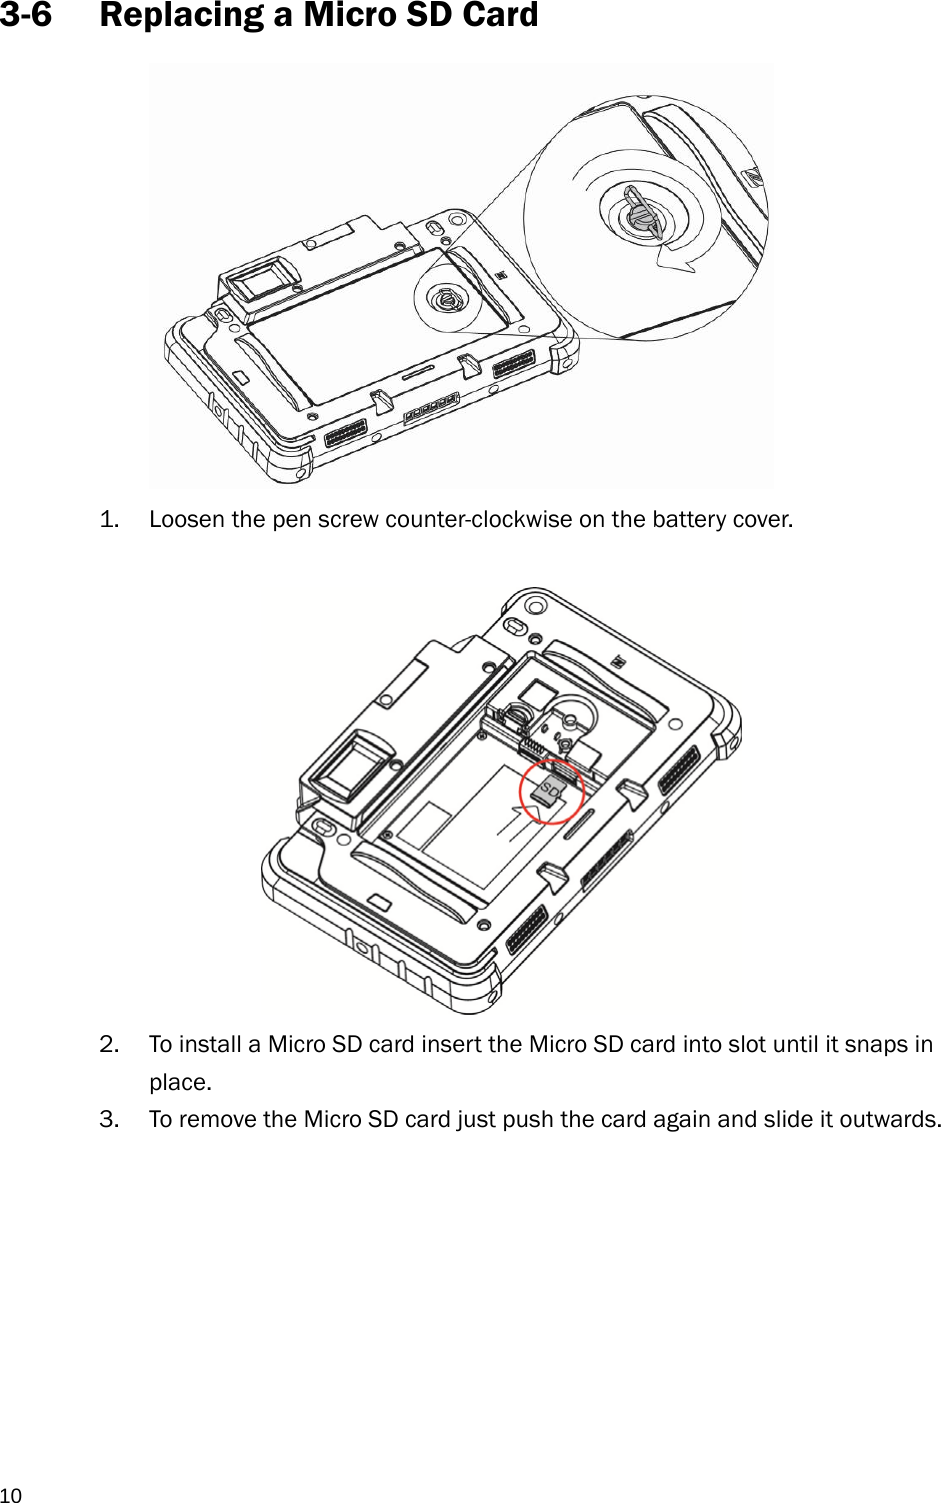  10 3-6 Replacing a Micro SD Card  1. Loosen the pen screw counter-clockwise on the battery cover.   2. To install a Micro SD card insert the Micro SD card into slot until it snaps in place. 3. To remove the Micro SD card just push the card again and slide it outwards.       